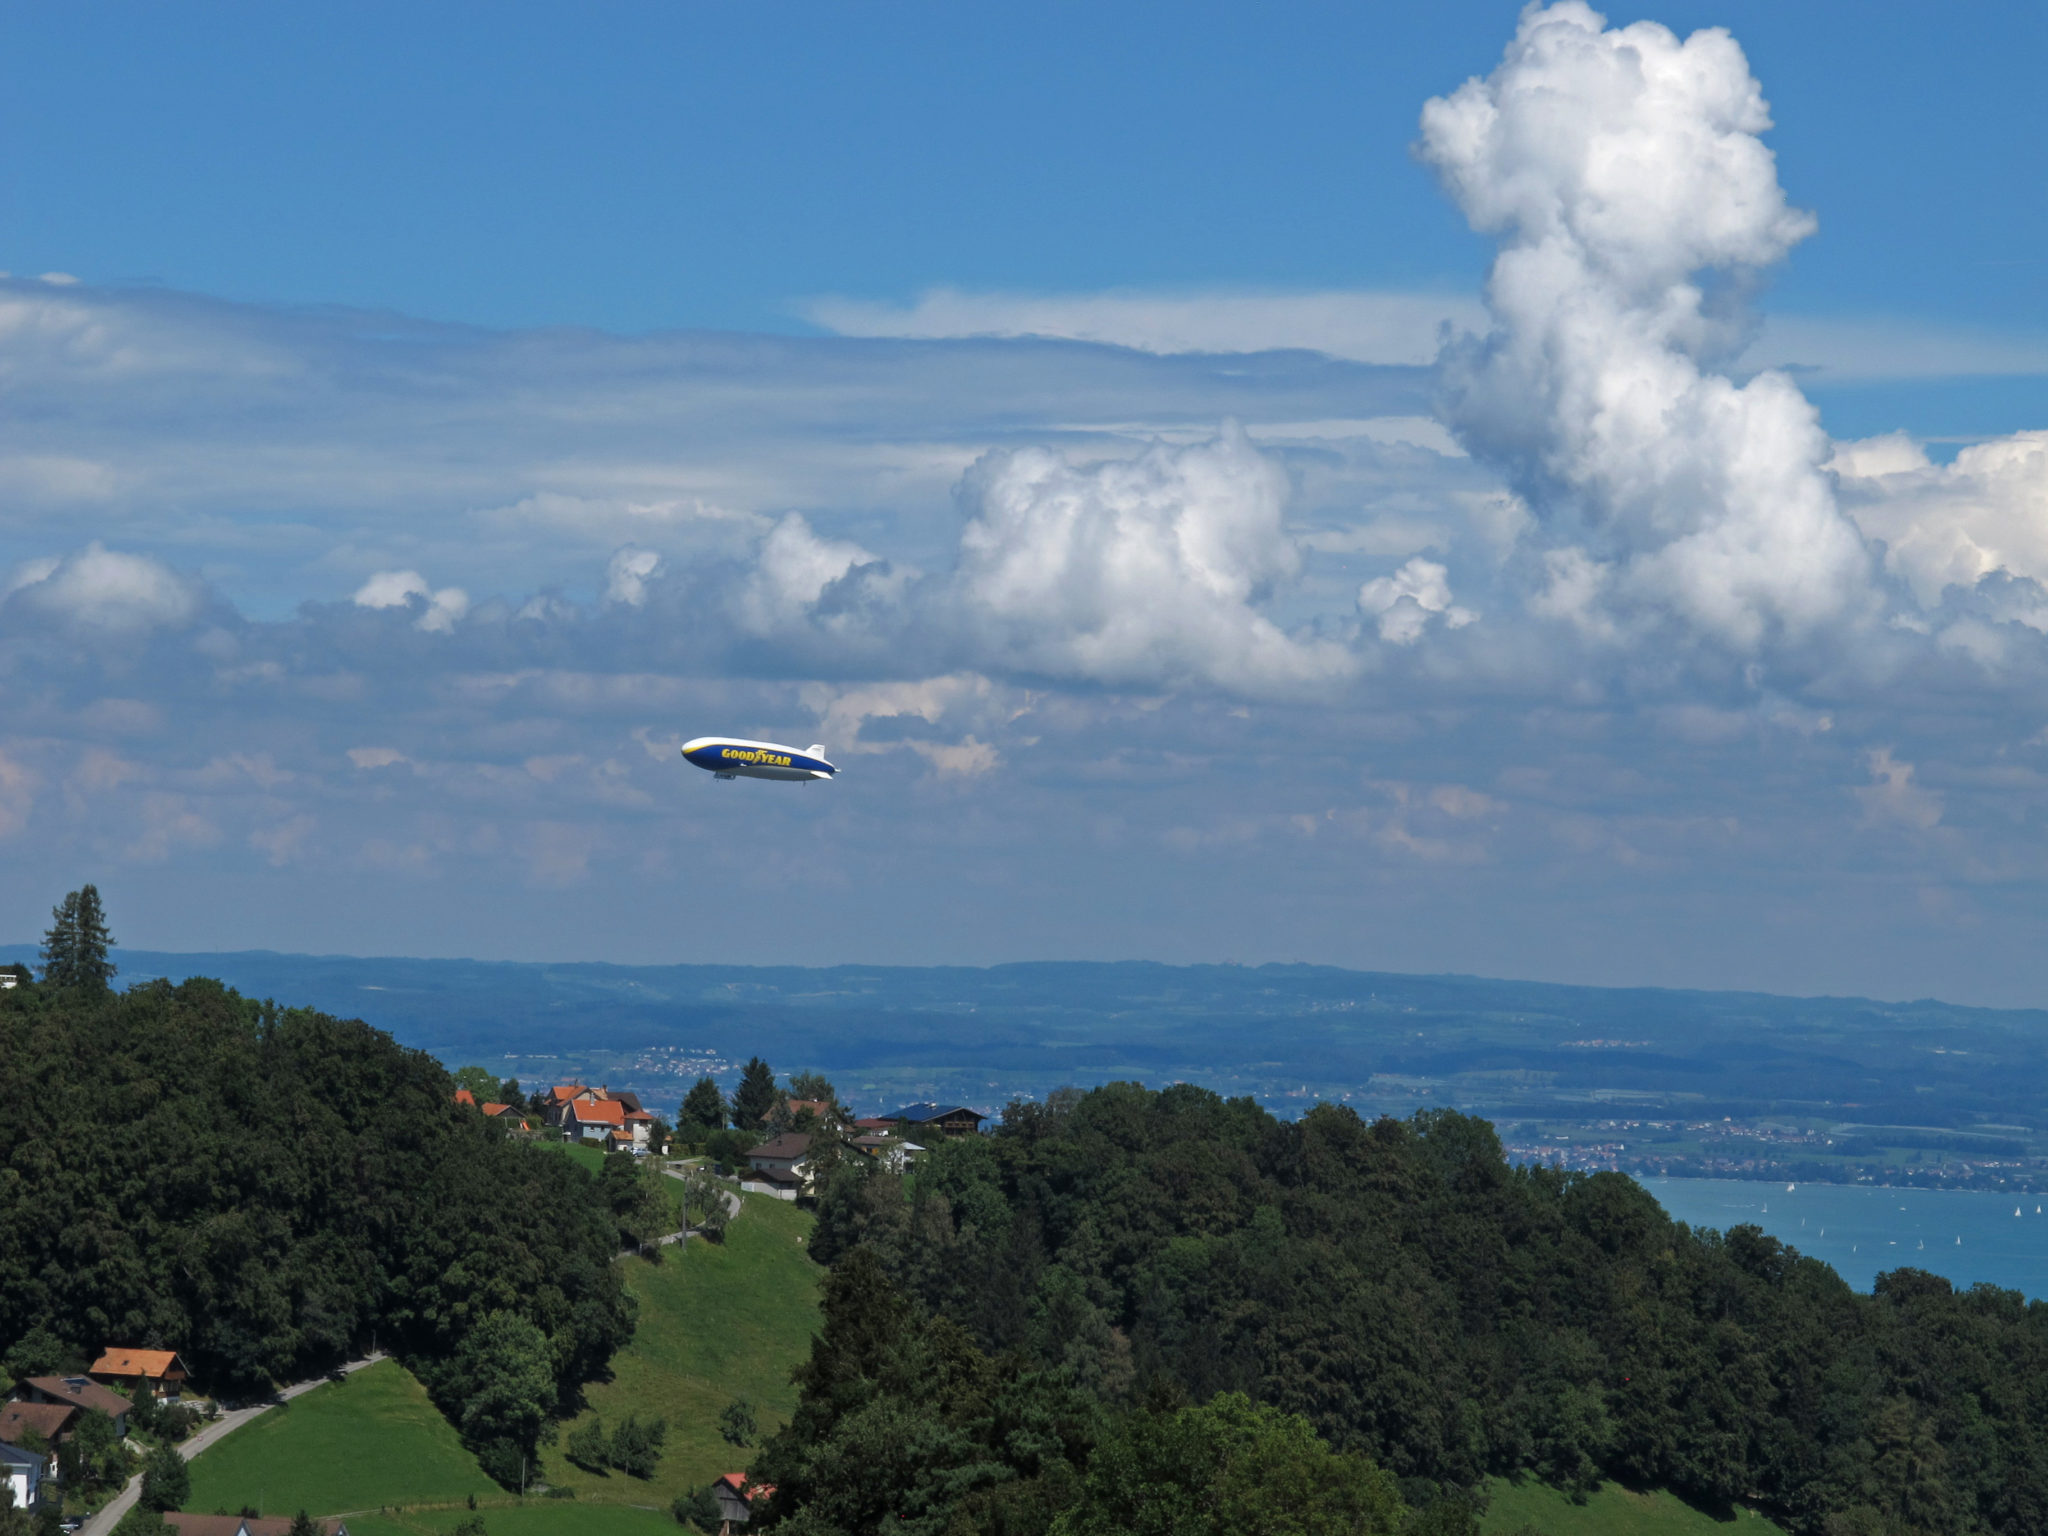 The Zeppelin over the lake